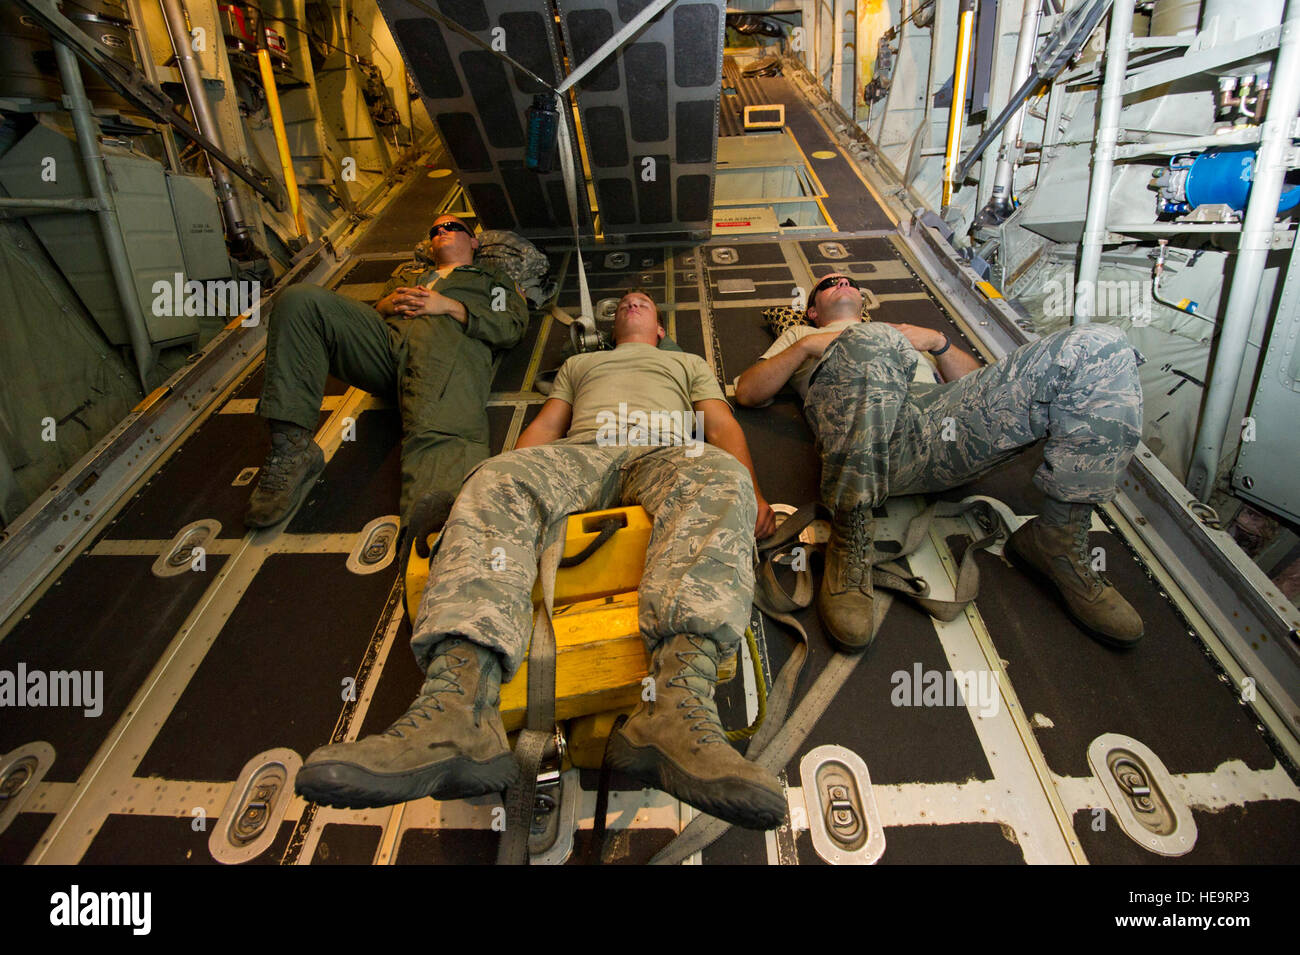 U.S. Air Force airmen sleep during a flight aboard a C-130H Hercules aircraft from the 731st Airlift Squadron, Peterson AFB, Colo., during a flight from Nevada Air National Guard Base Reno, to Fort Hunter-Liggett, Calif., on June 19, 2012 during Exercise GLOBAL MEDIC 2012.  Exercise GLOBAL MEDIC 2012 is a yearly joint field training exercise for theater aeromedical evacuation systems and ground medical components designed to replicate all aspects of combat medical service support.  Tech. Sgt. Erica J. Knight Stock Photo